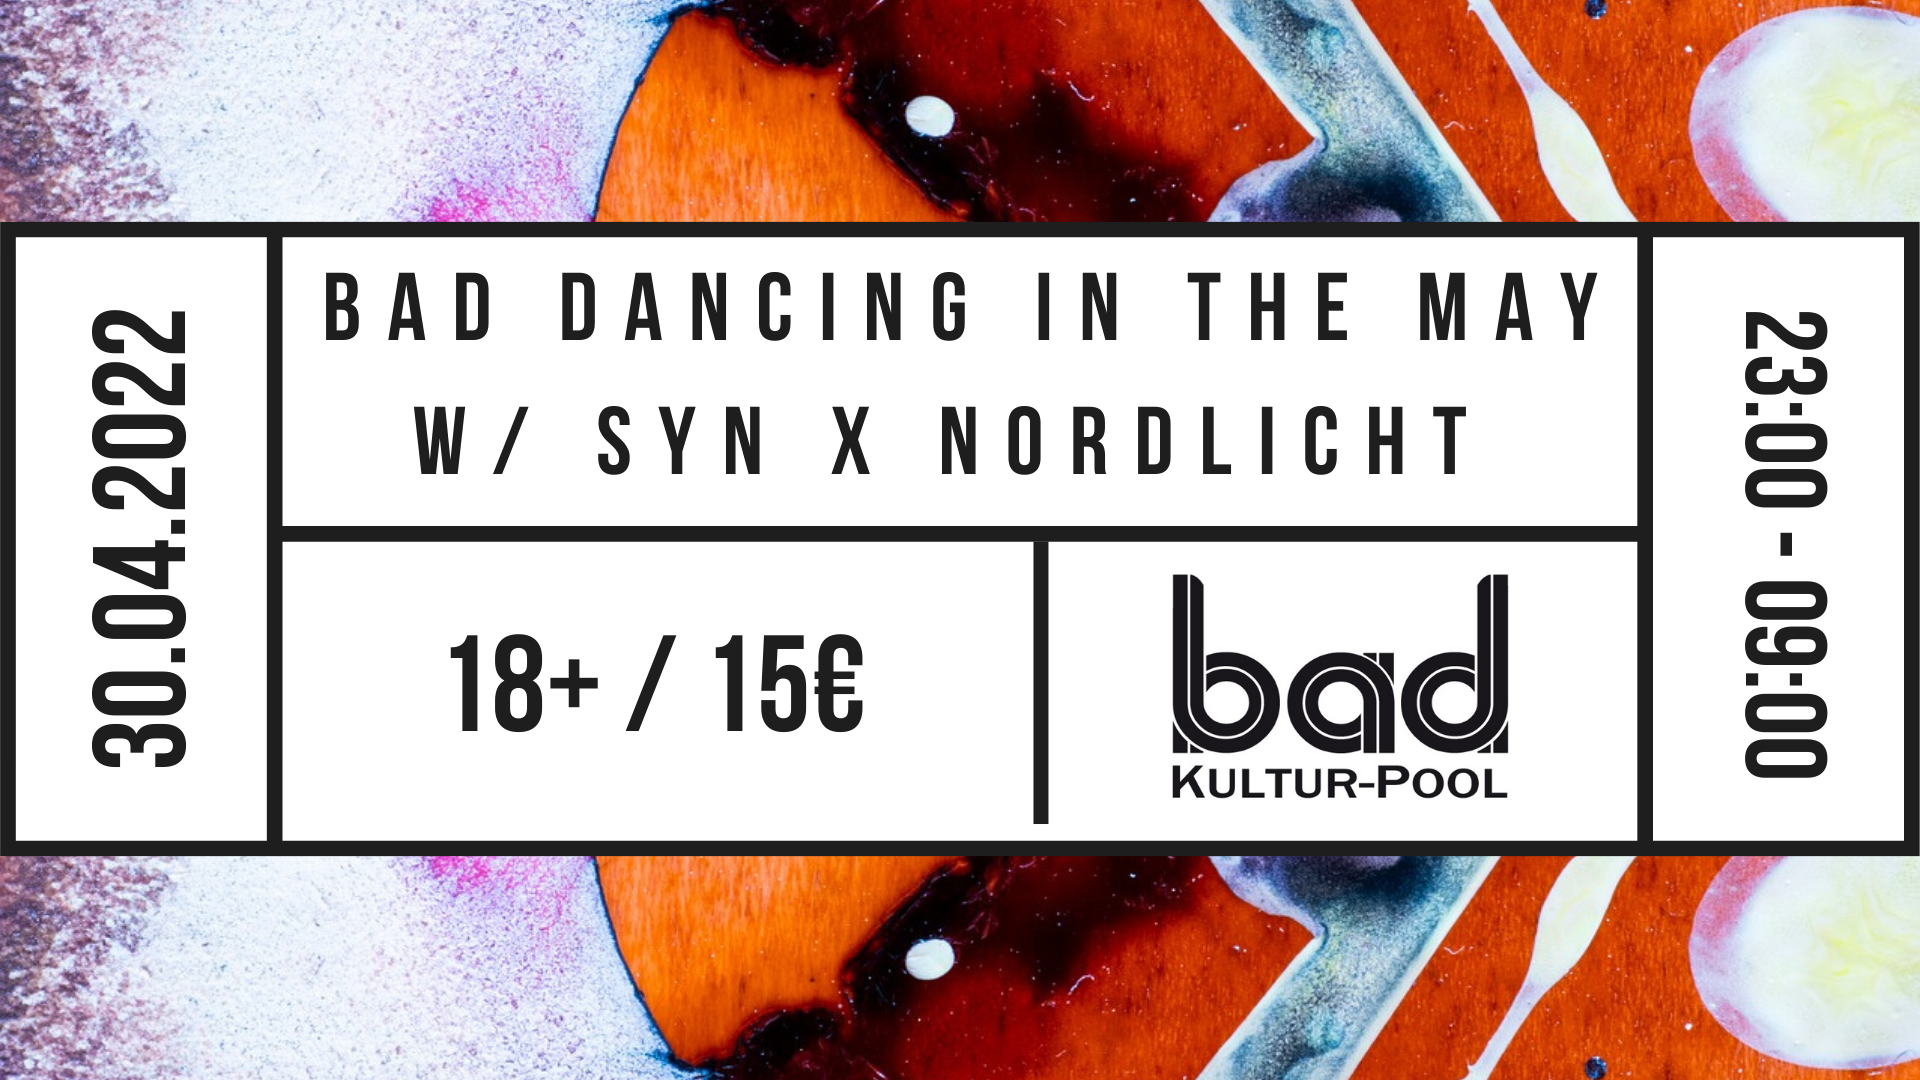 Bad Dancing in the May with Syn x Nordlicht - フライヤー表